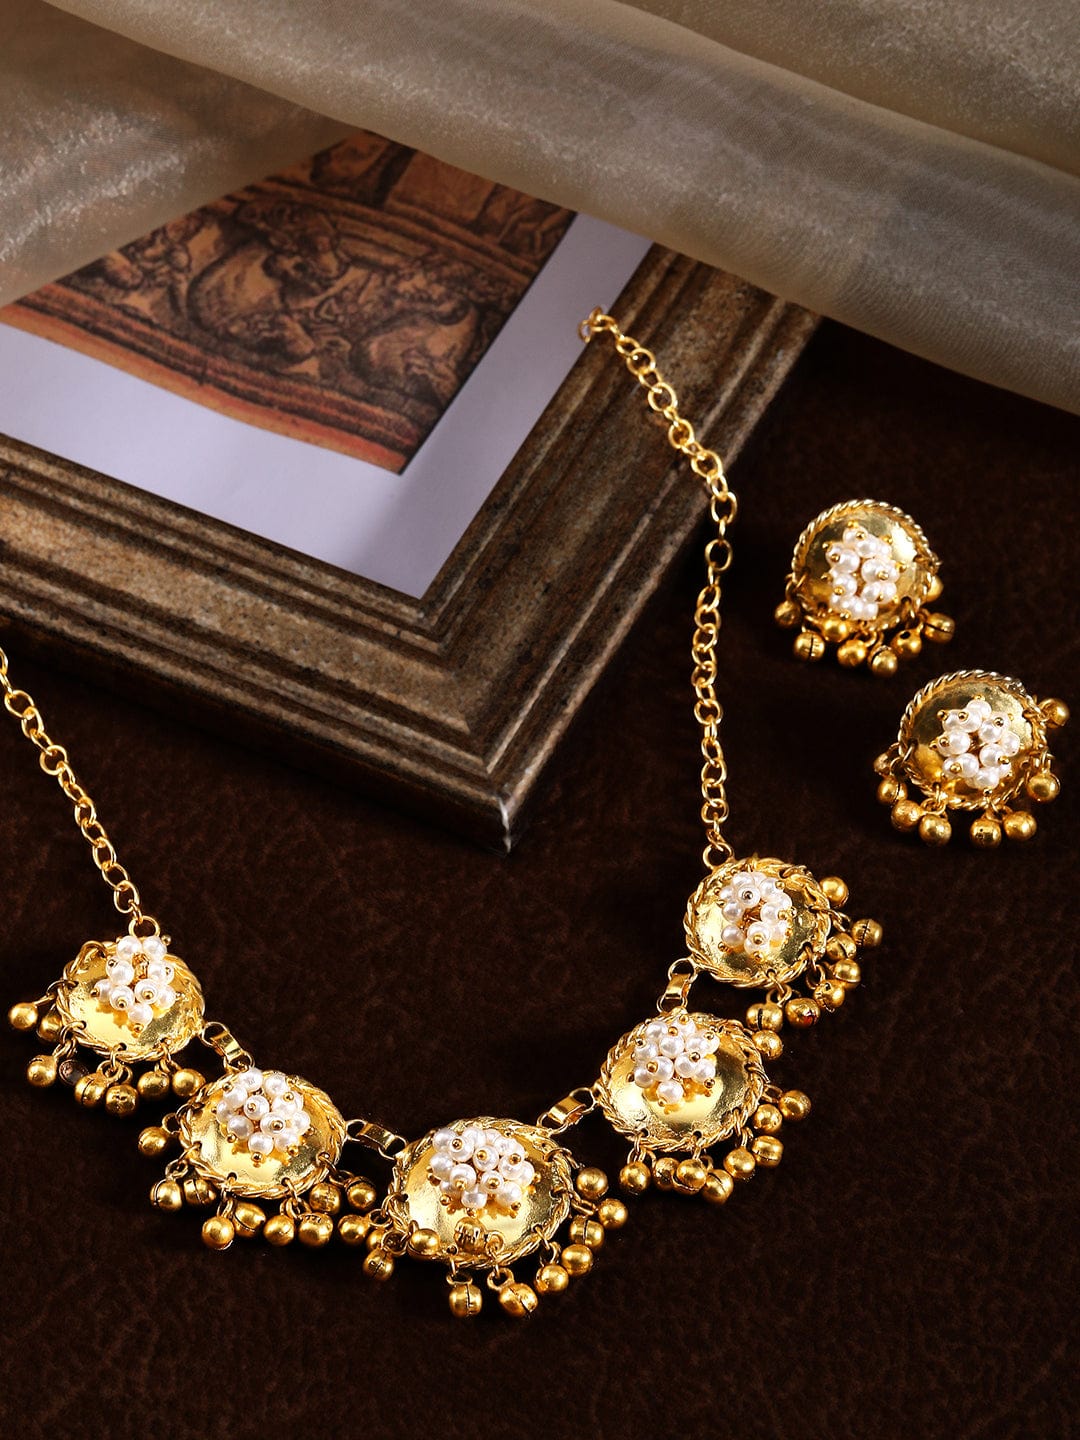 Rubans 24K Gold Plated Handcrafted Necklace Set With Circular Design, Pearls & Golden Beads.